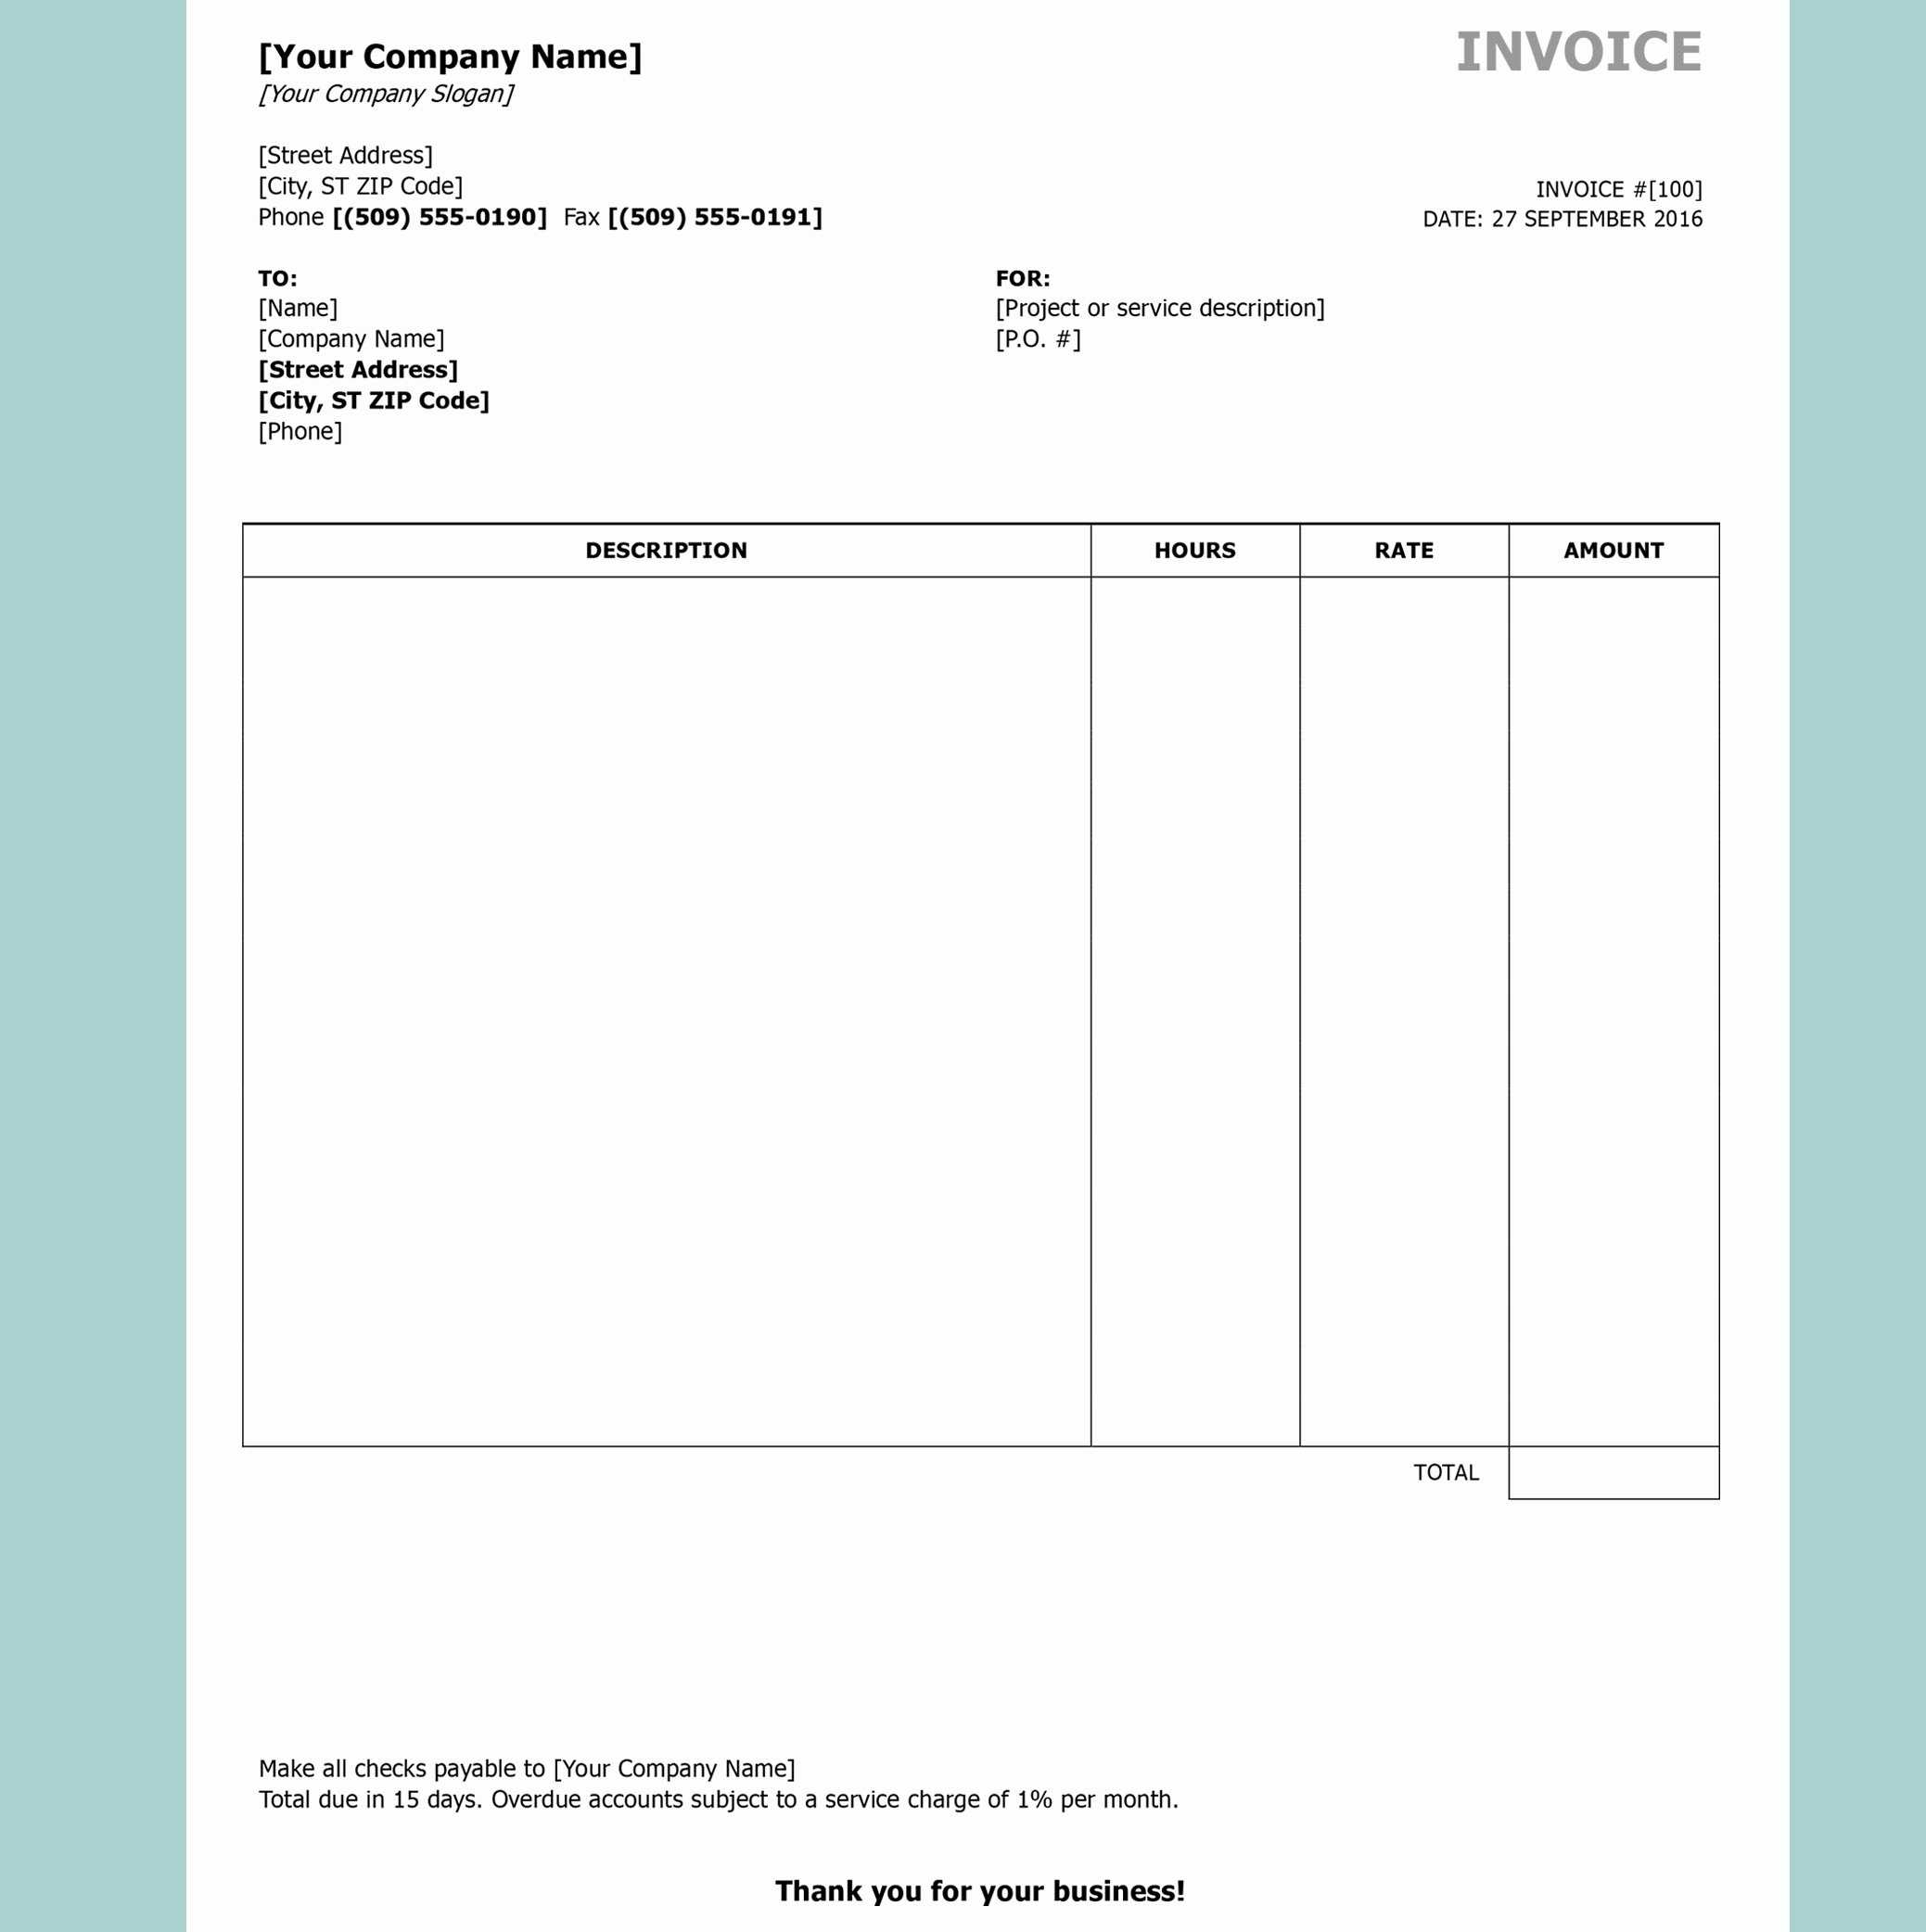 Free Simple Invoice Template For Word - Calep.midnightpig.co Regarding Free Downloadable Invoice Template For Word